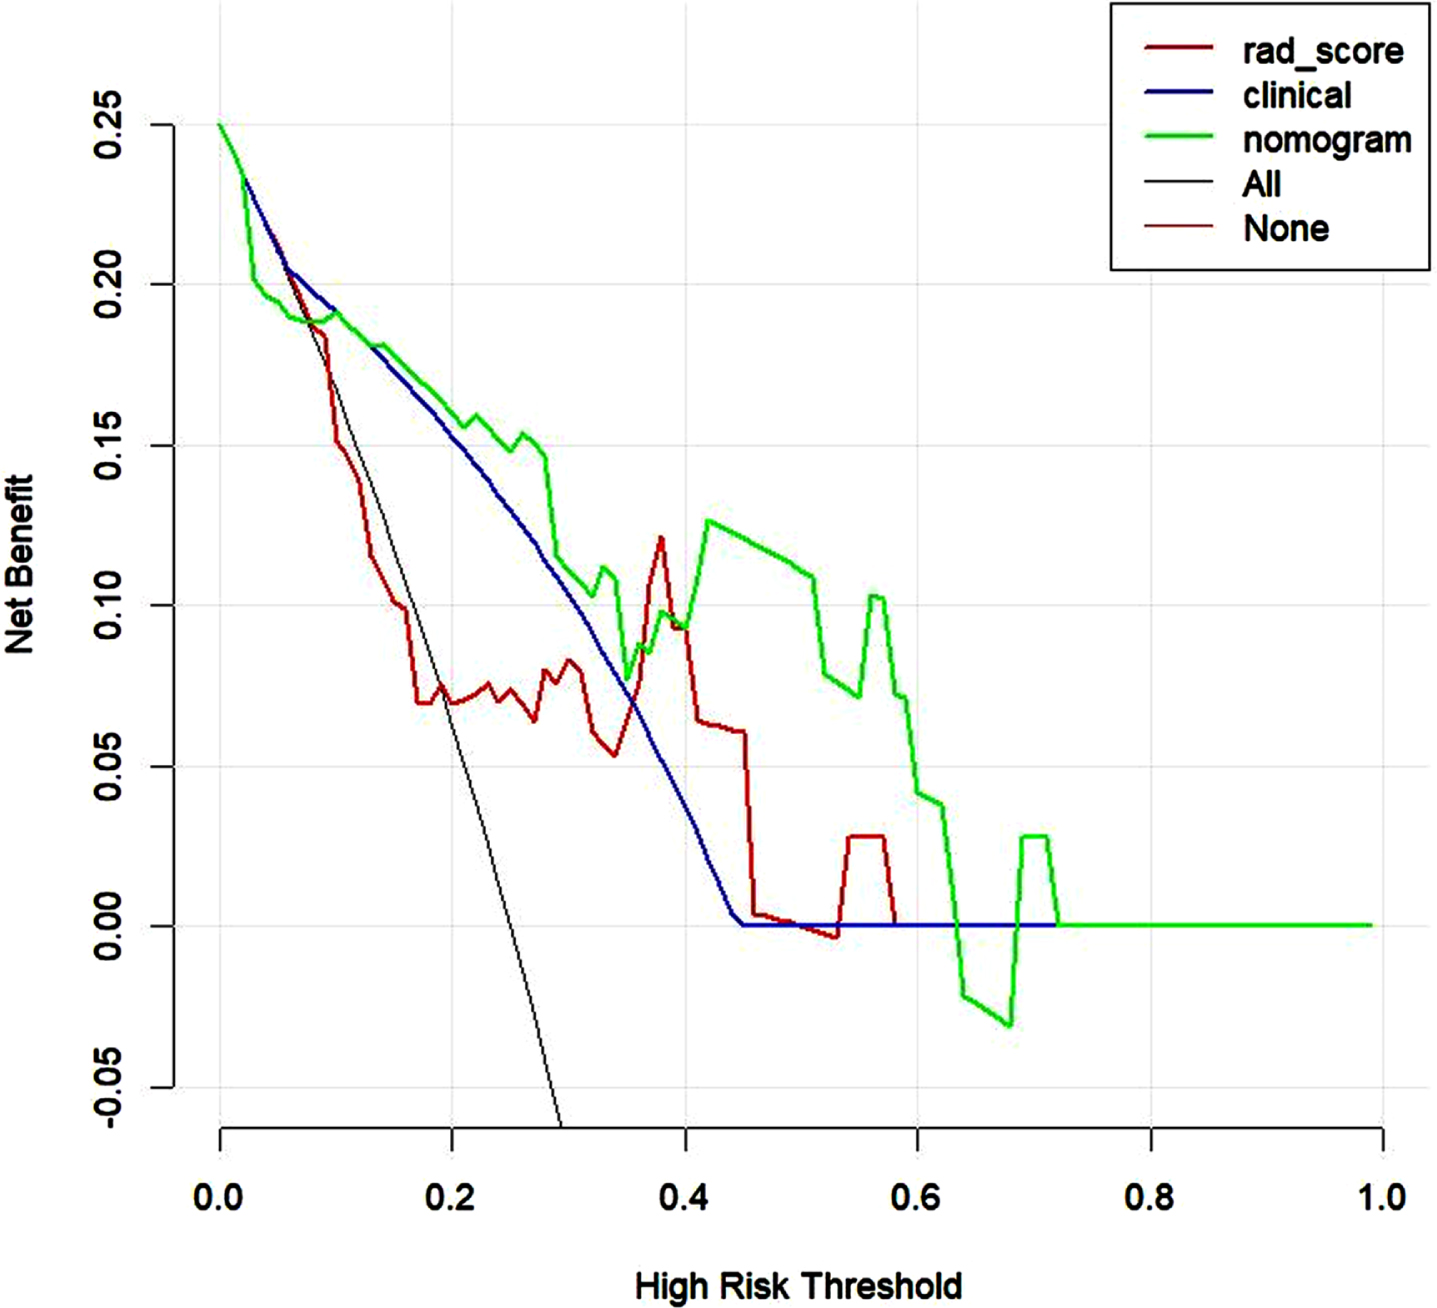 Decision curve analysis of three models in validation set. The y-axis measures the net benefit. The green line represents the radiomics nomogram. The red line represents the radiomics score. The blue line represents the clinical model. The black line represents the assumption that all patients achieve the PCR after NAC. The horizontal red thin line represents the assumption that no patients reach the PCR after NAC.